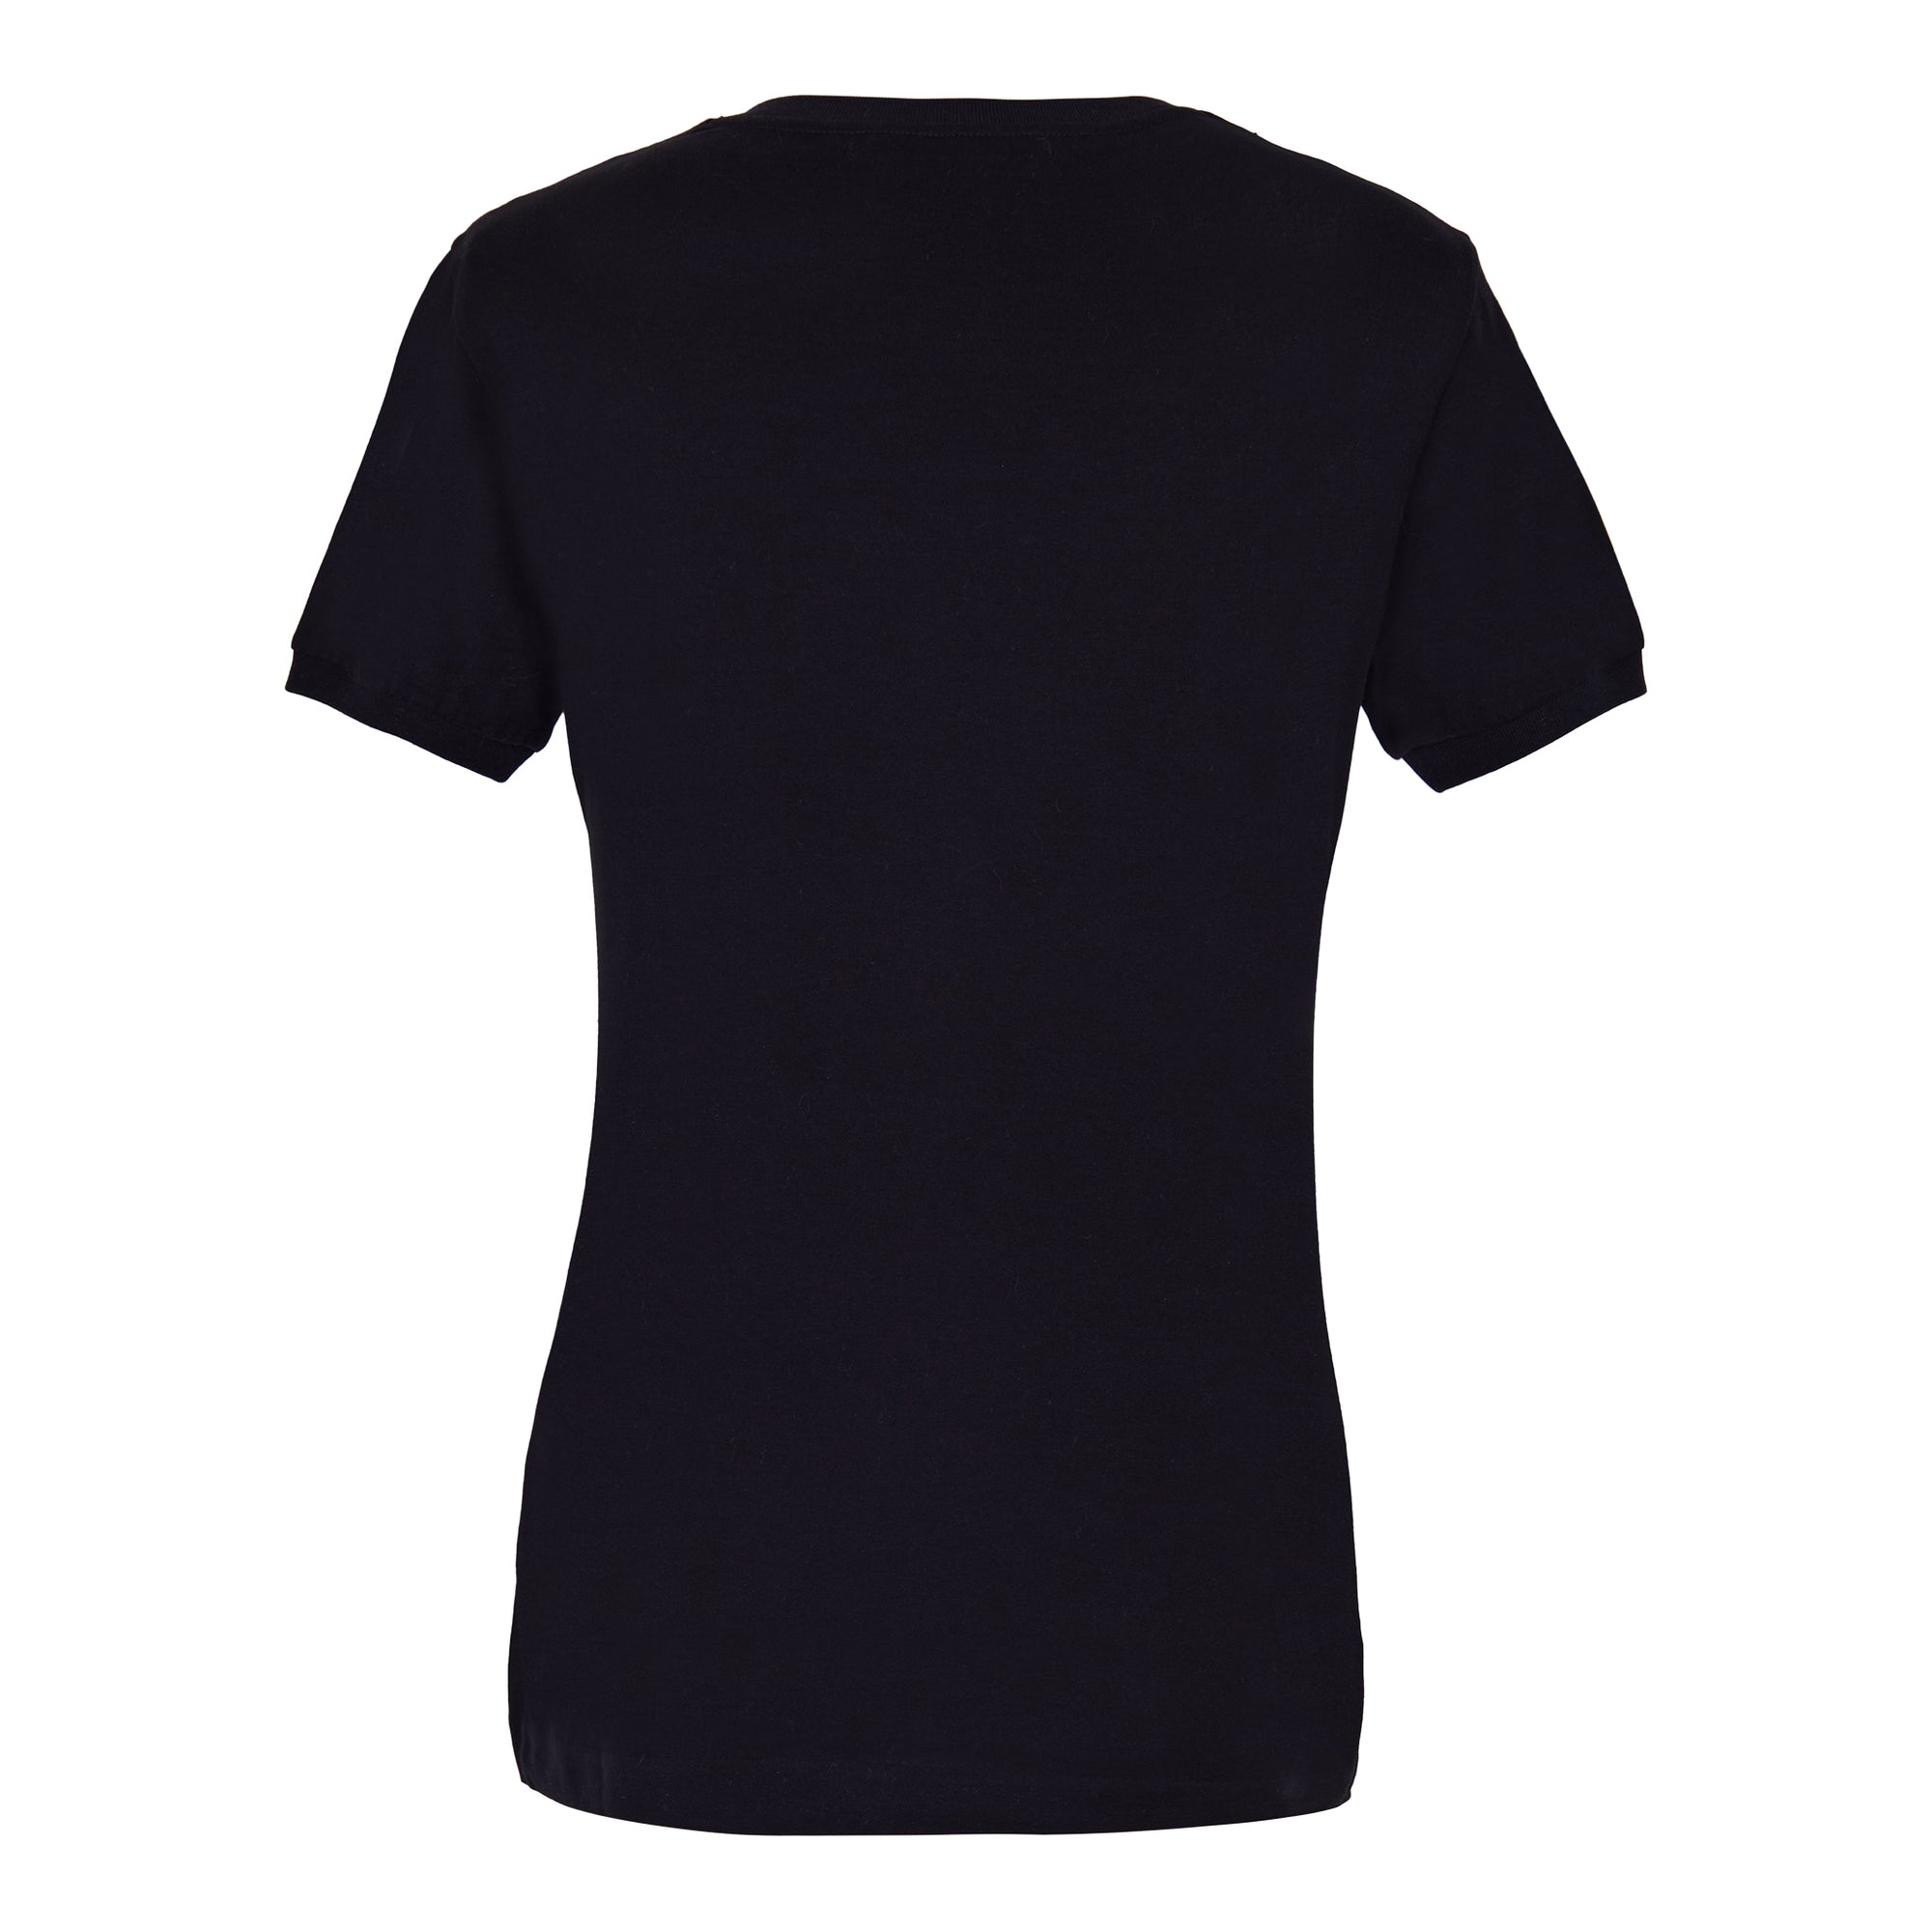 Dolce & Gabbana Black T-shirt with lace